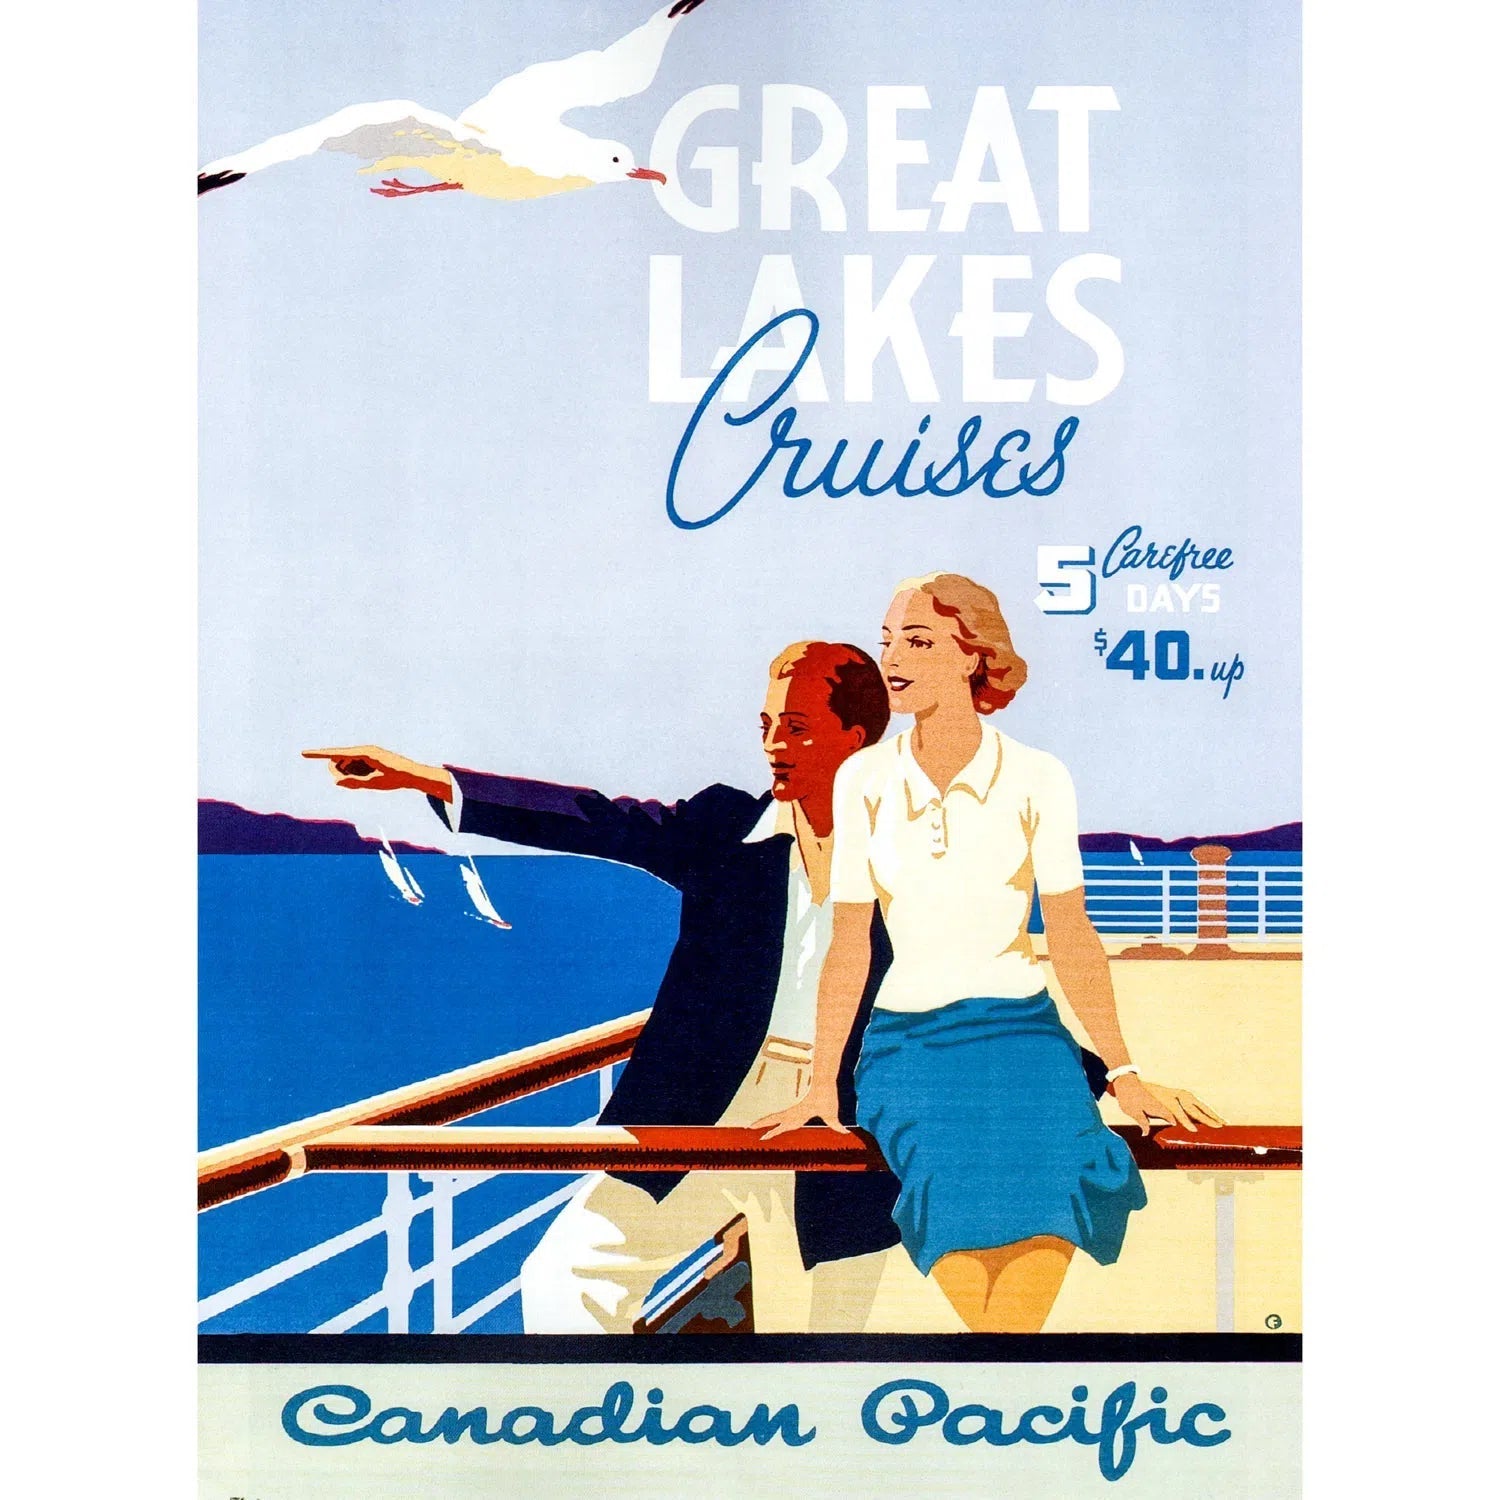 Great lakes cruises - Canadian pacific-Imagesdartistes